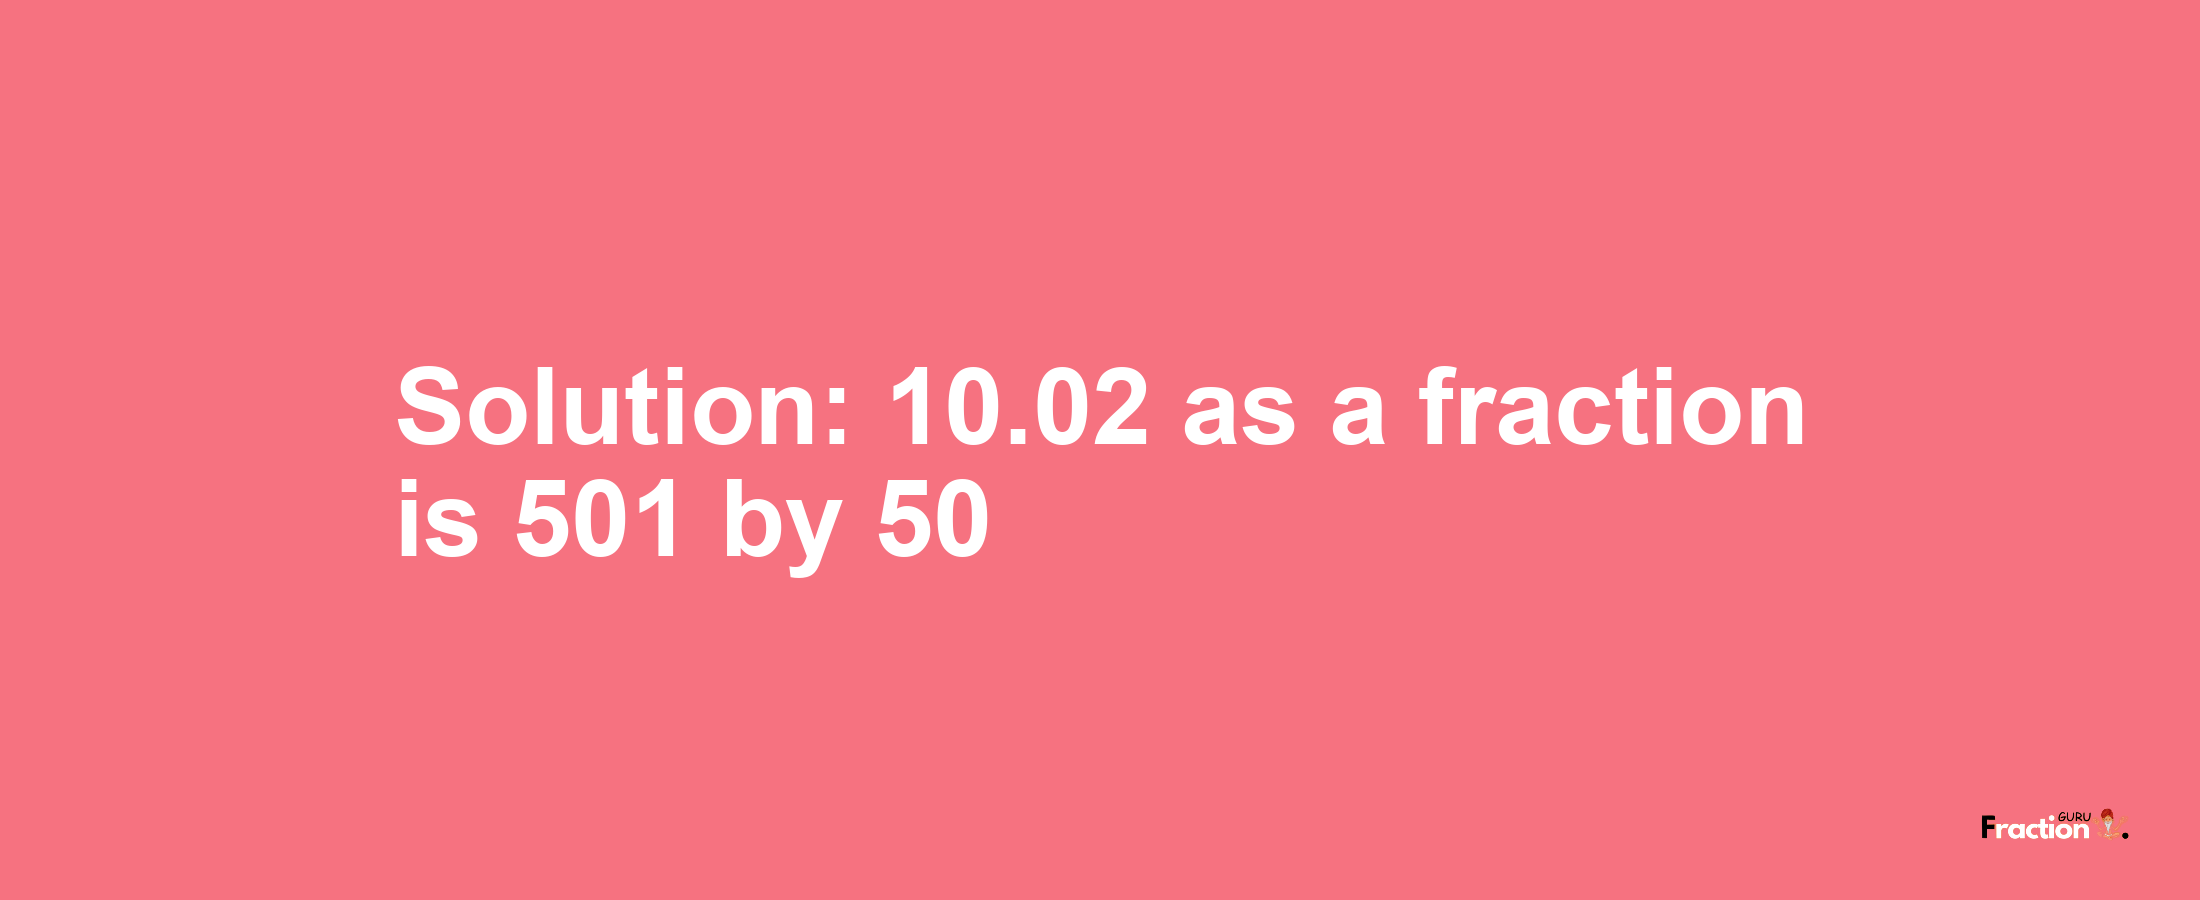 Solution:10.02 as a fraction is 501/50